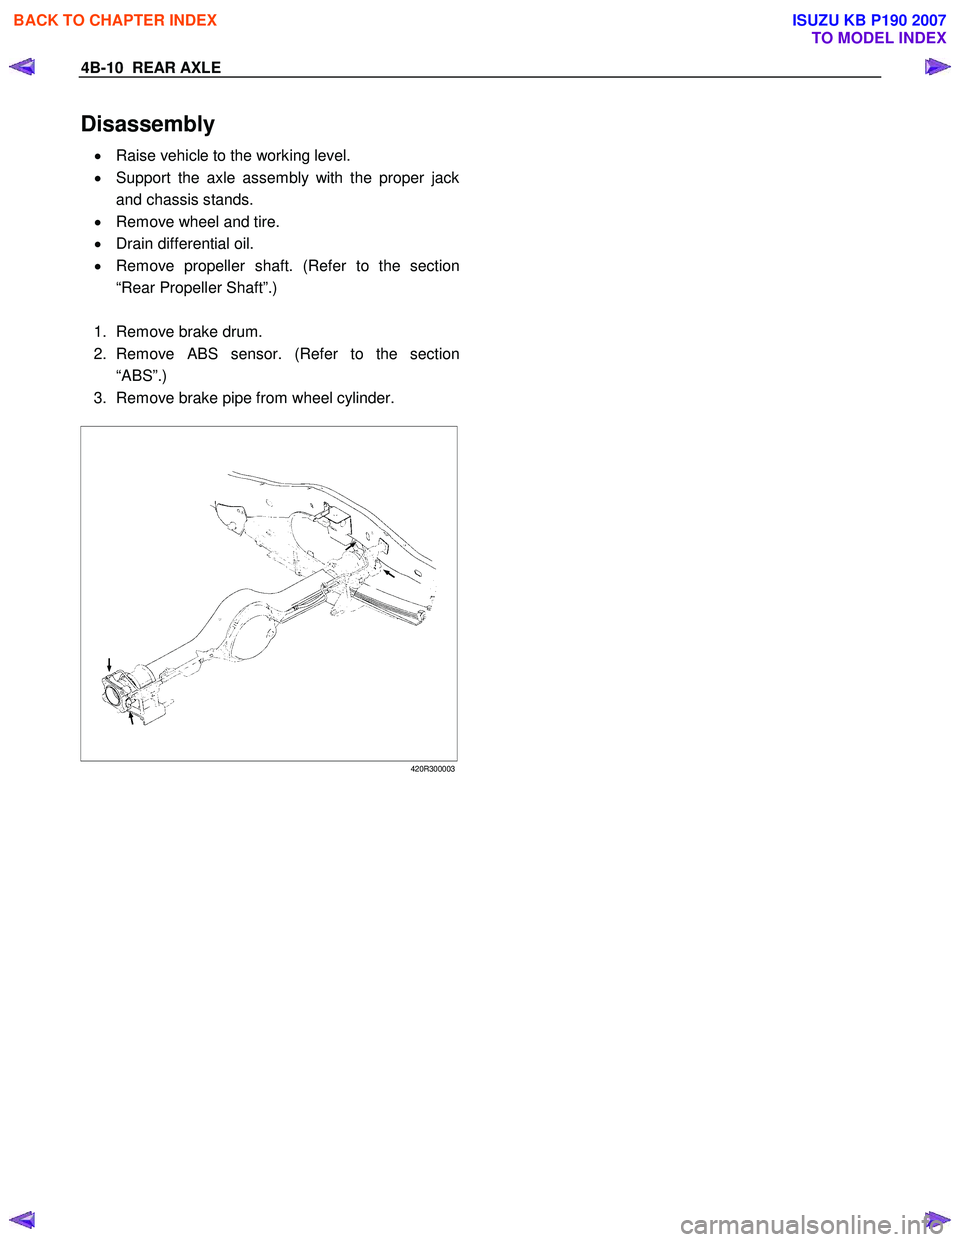 ISUZU KB P190 2007  Workshop Repair Manual 4B-10  REAR AXLE 
Disassembly 
• Raise vehicle to the working level. 
•  Support the axle assembly with the proper jack 
and chassis stands. 
•  Remove wheel and tire. 
•  Drain differential o